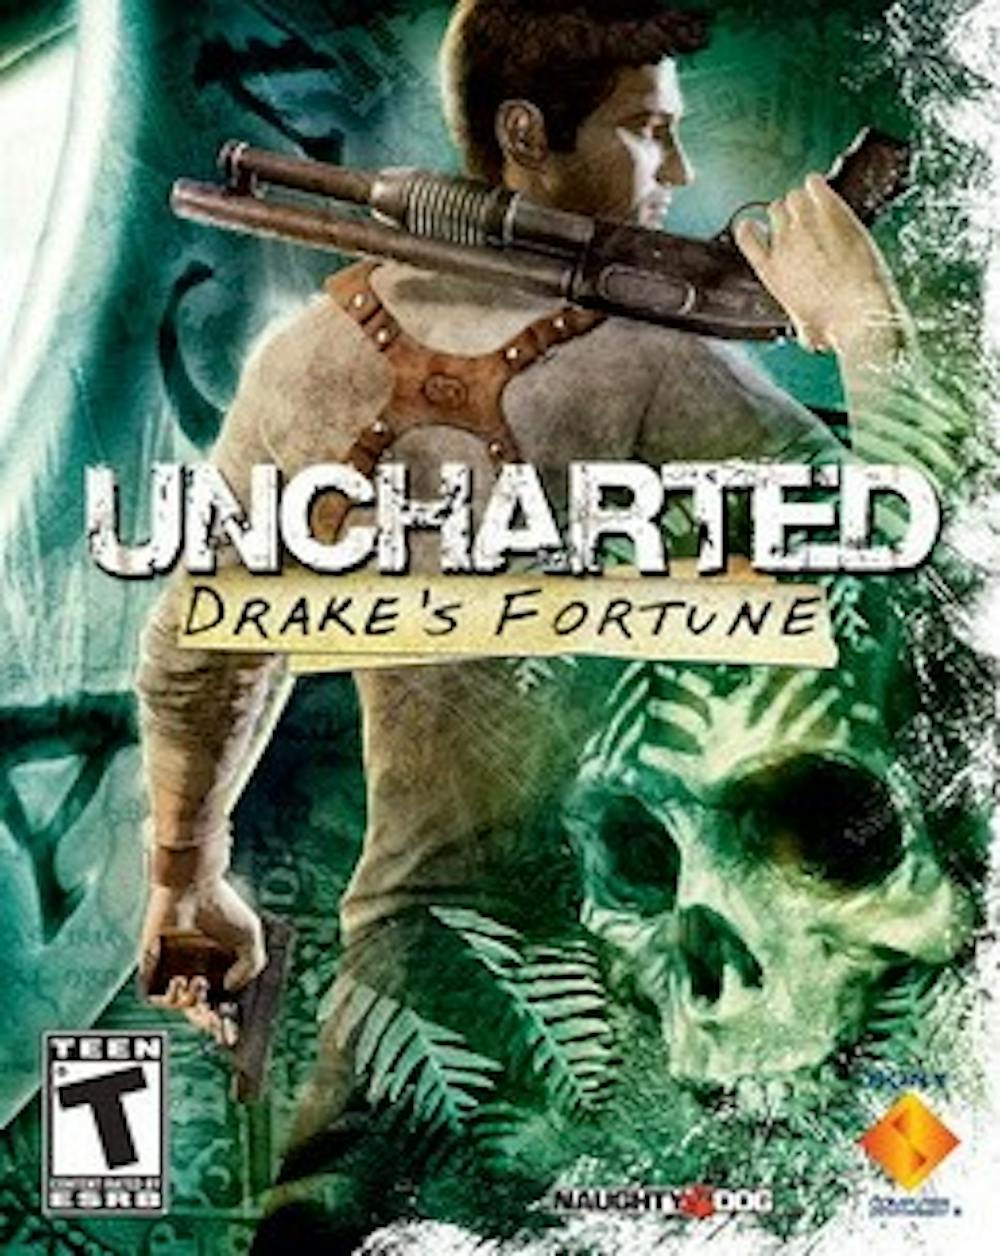 <p>While all of their games contributed to their immense success, the "Uncharted" series was the biggest turning point of Naughty Dog's career.</p>